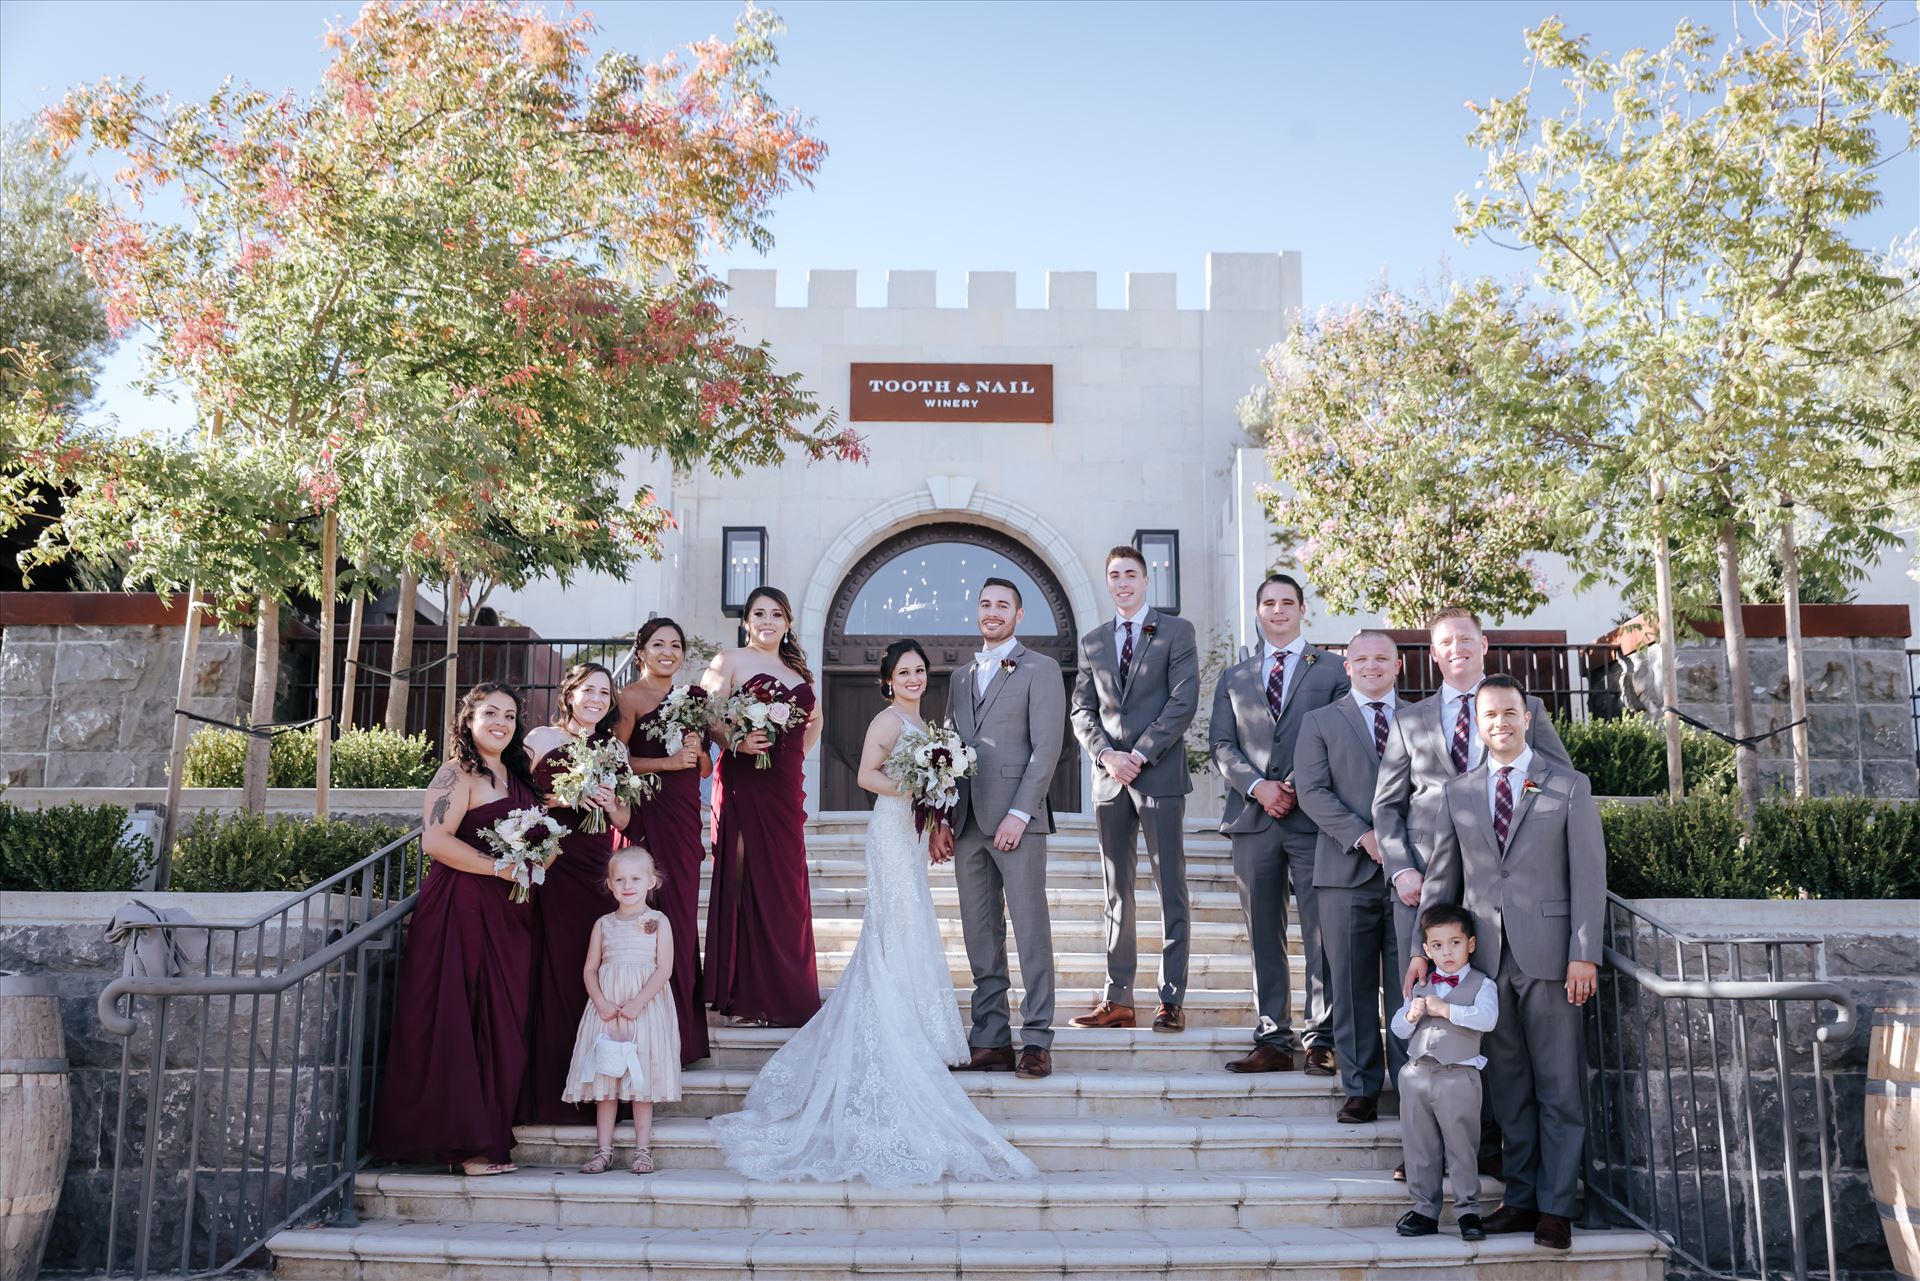 Edith and Kyle 124 - Mirror's Edge Photography captures Edith and Kyle's wedding at the Tooth and Nail Winery in Paso Robles California. Bride, Groom and Bridal Party by Sarah Williams